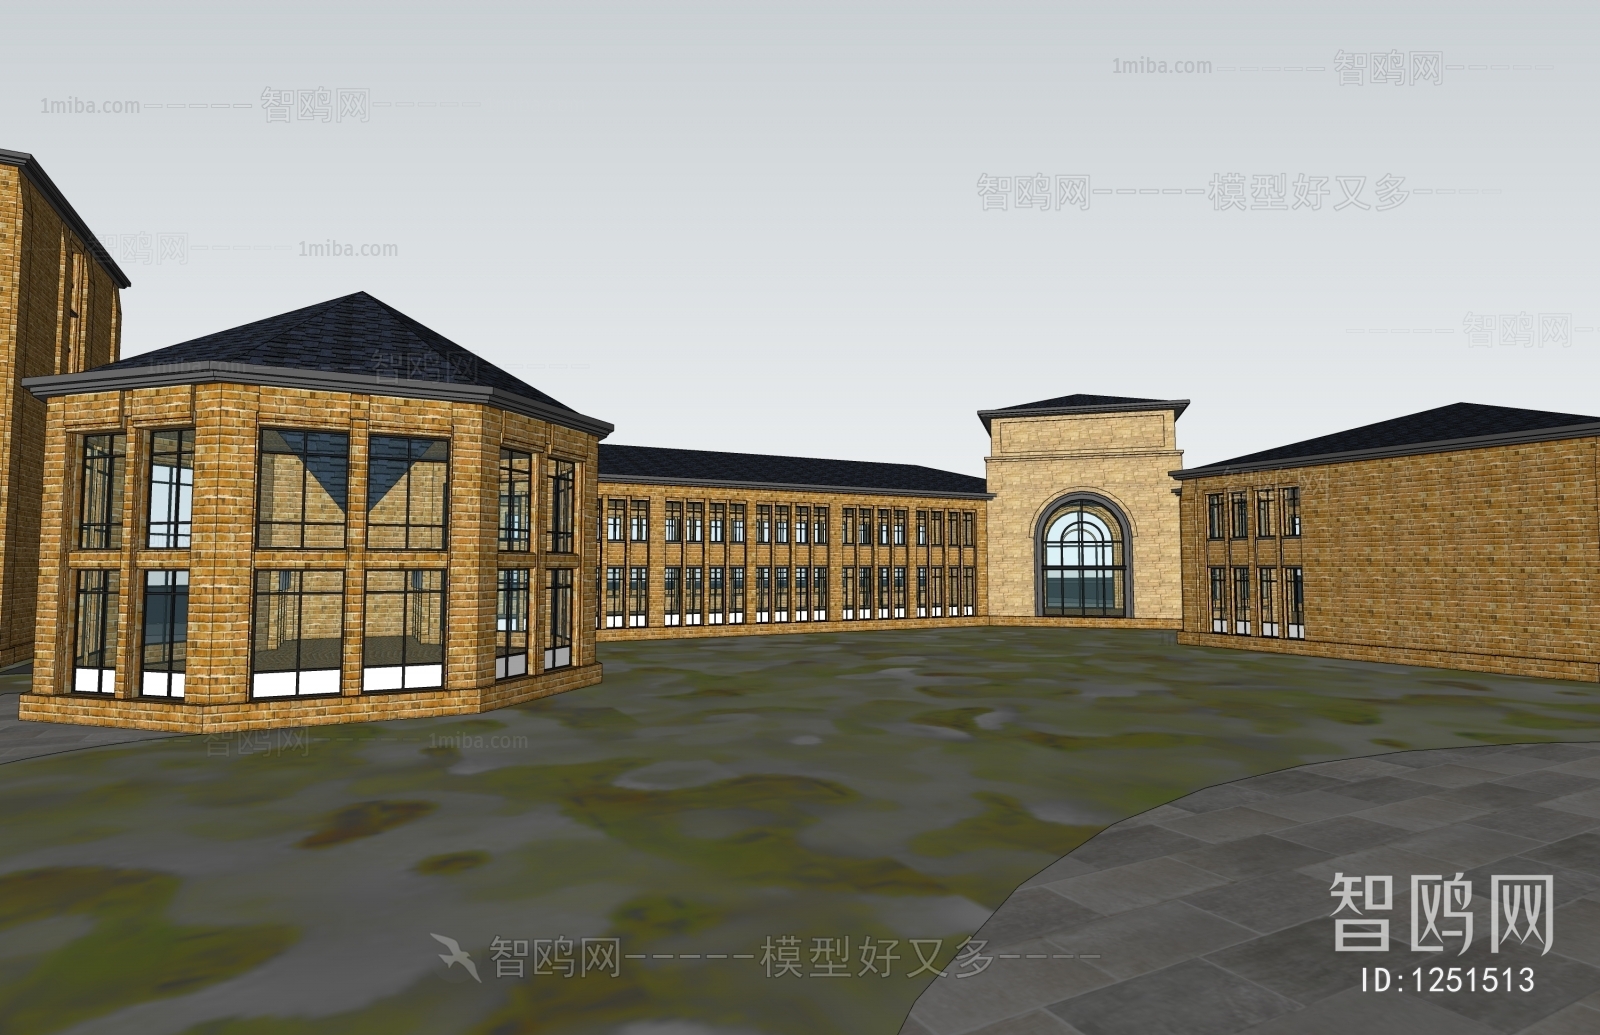 New Classical Style Building Appearance